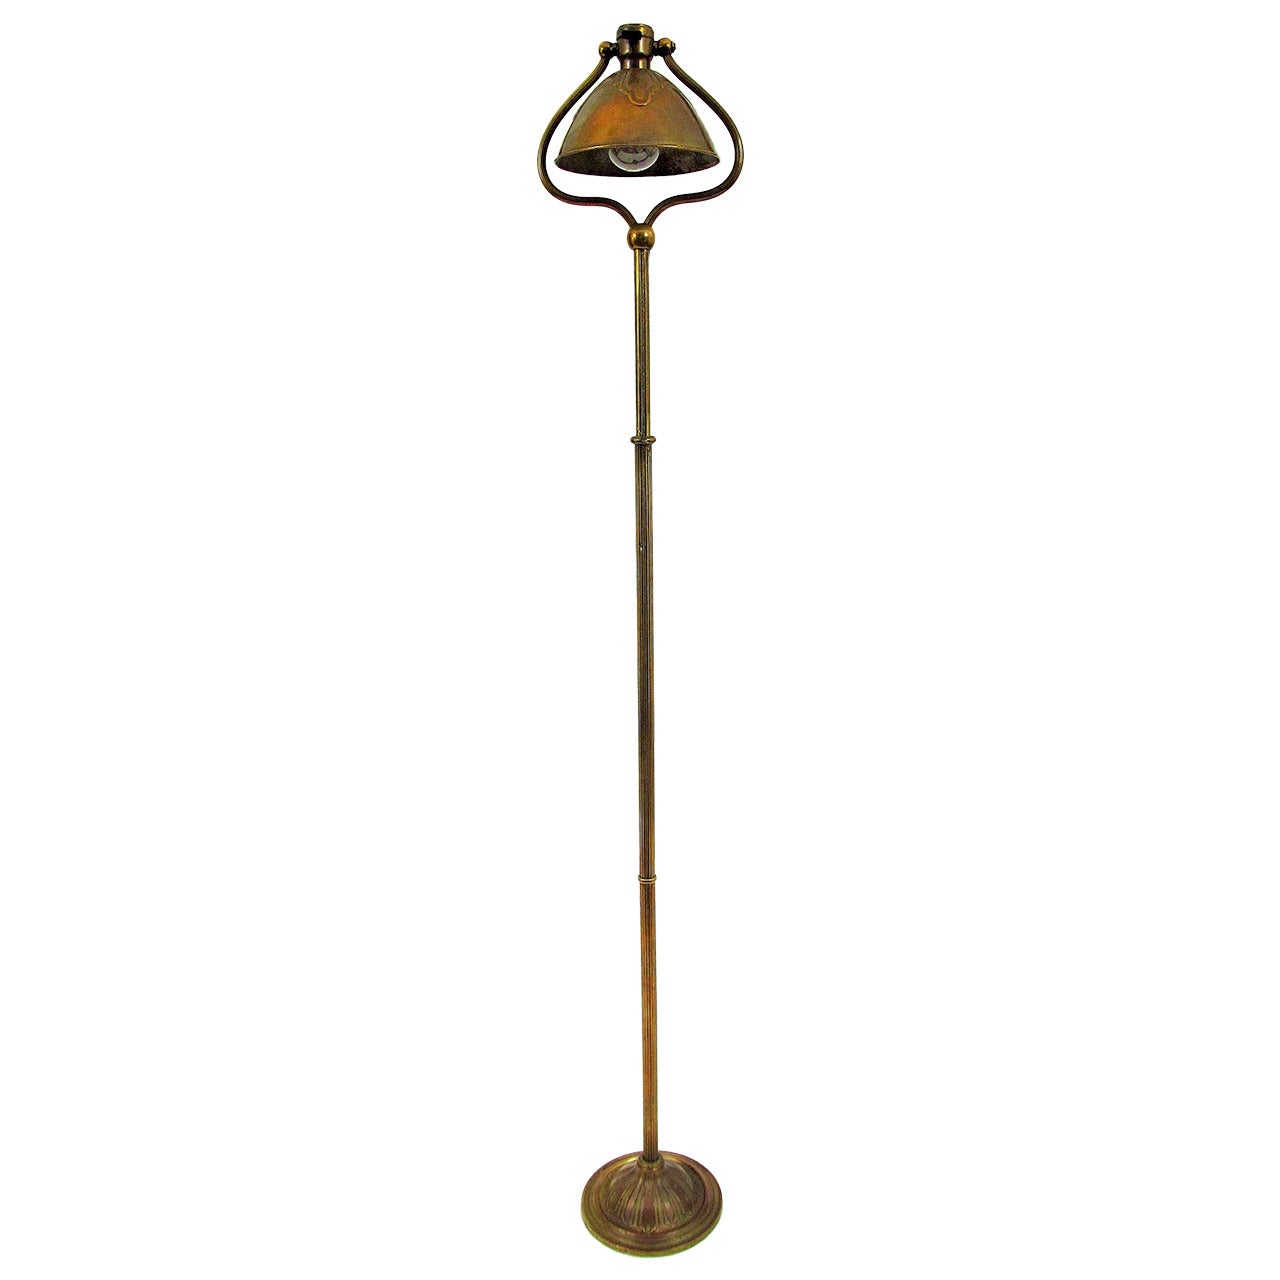 Bradley and Hubbard Telescoping Arts and Crafts Brass Floor Lamp